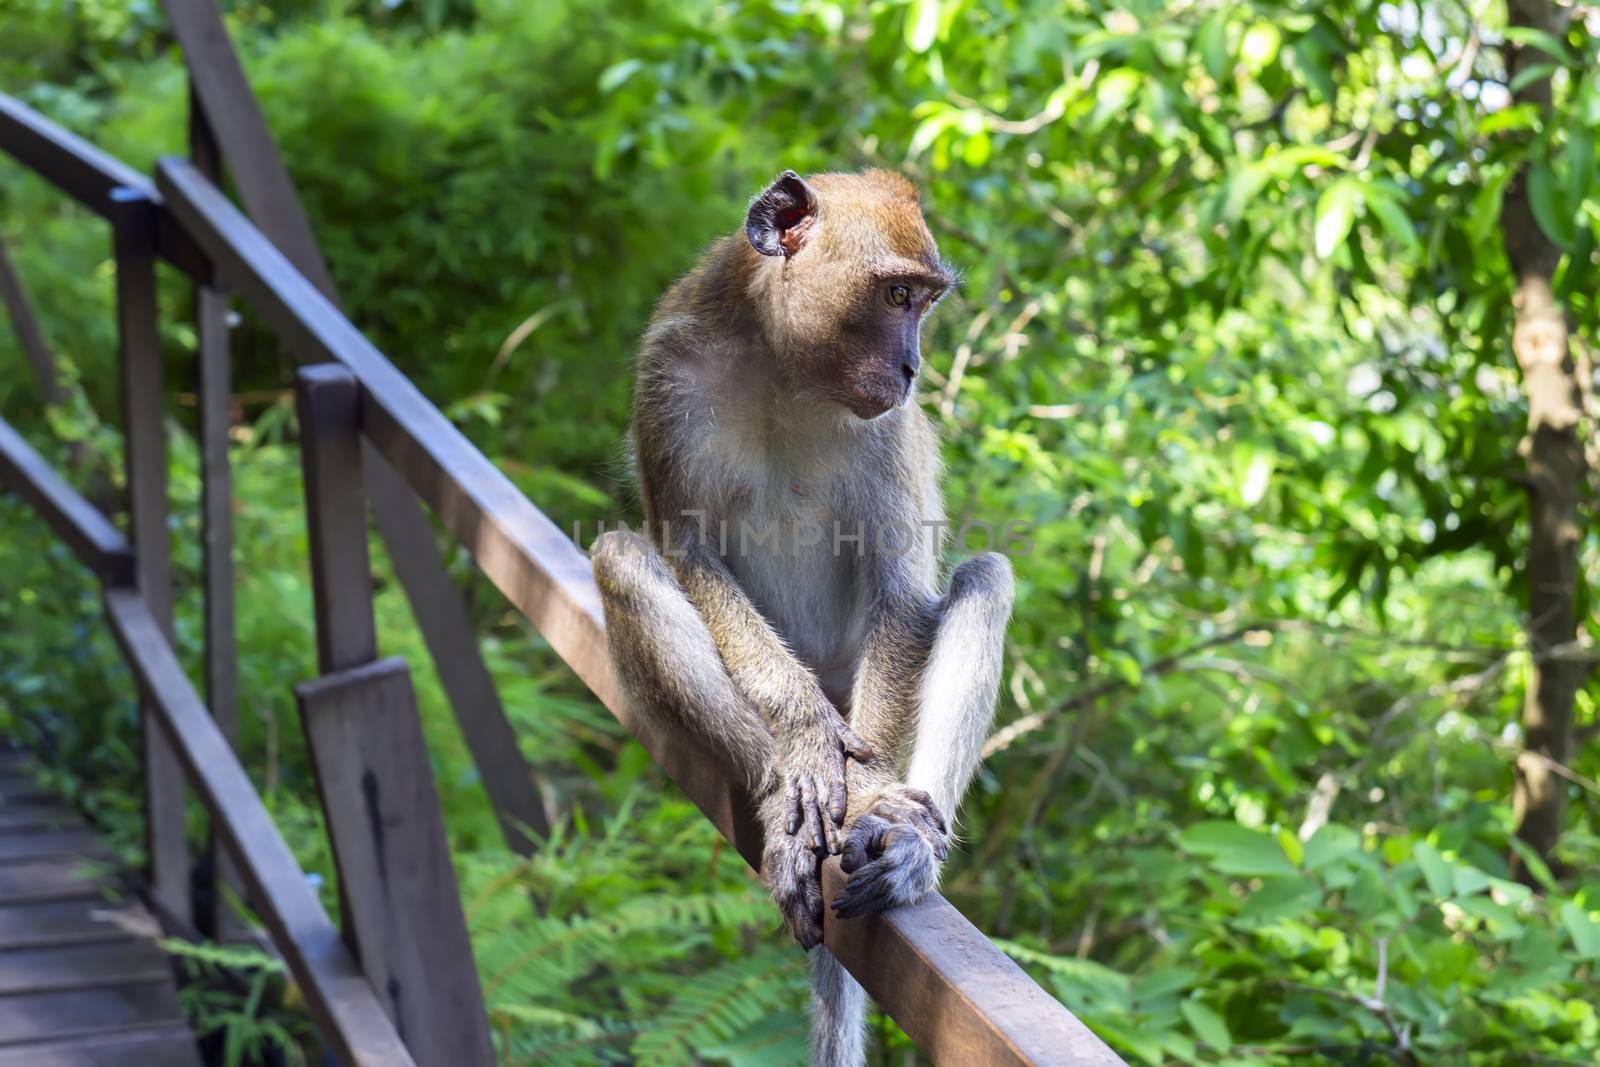 Young Macaque. Genus Macaca of Old World Monkeys. Krabi Province